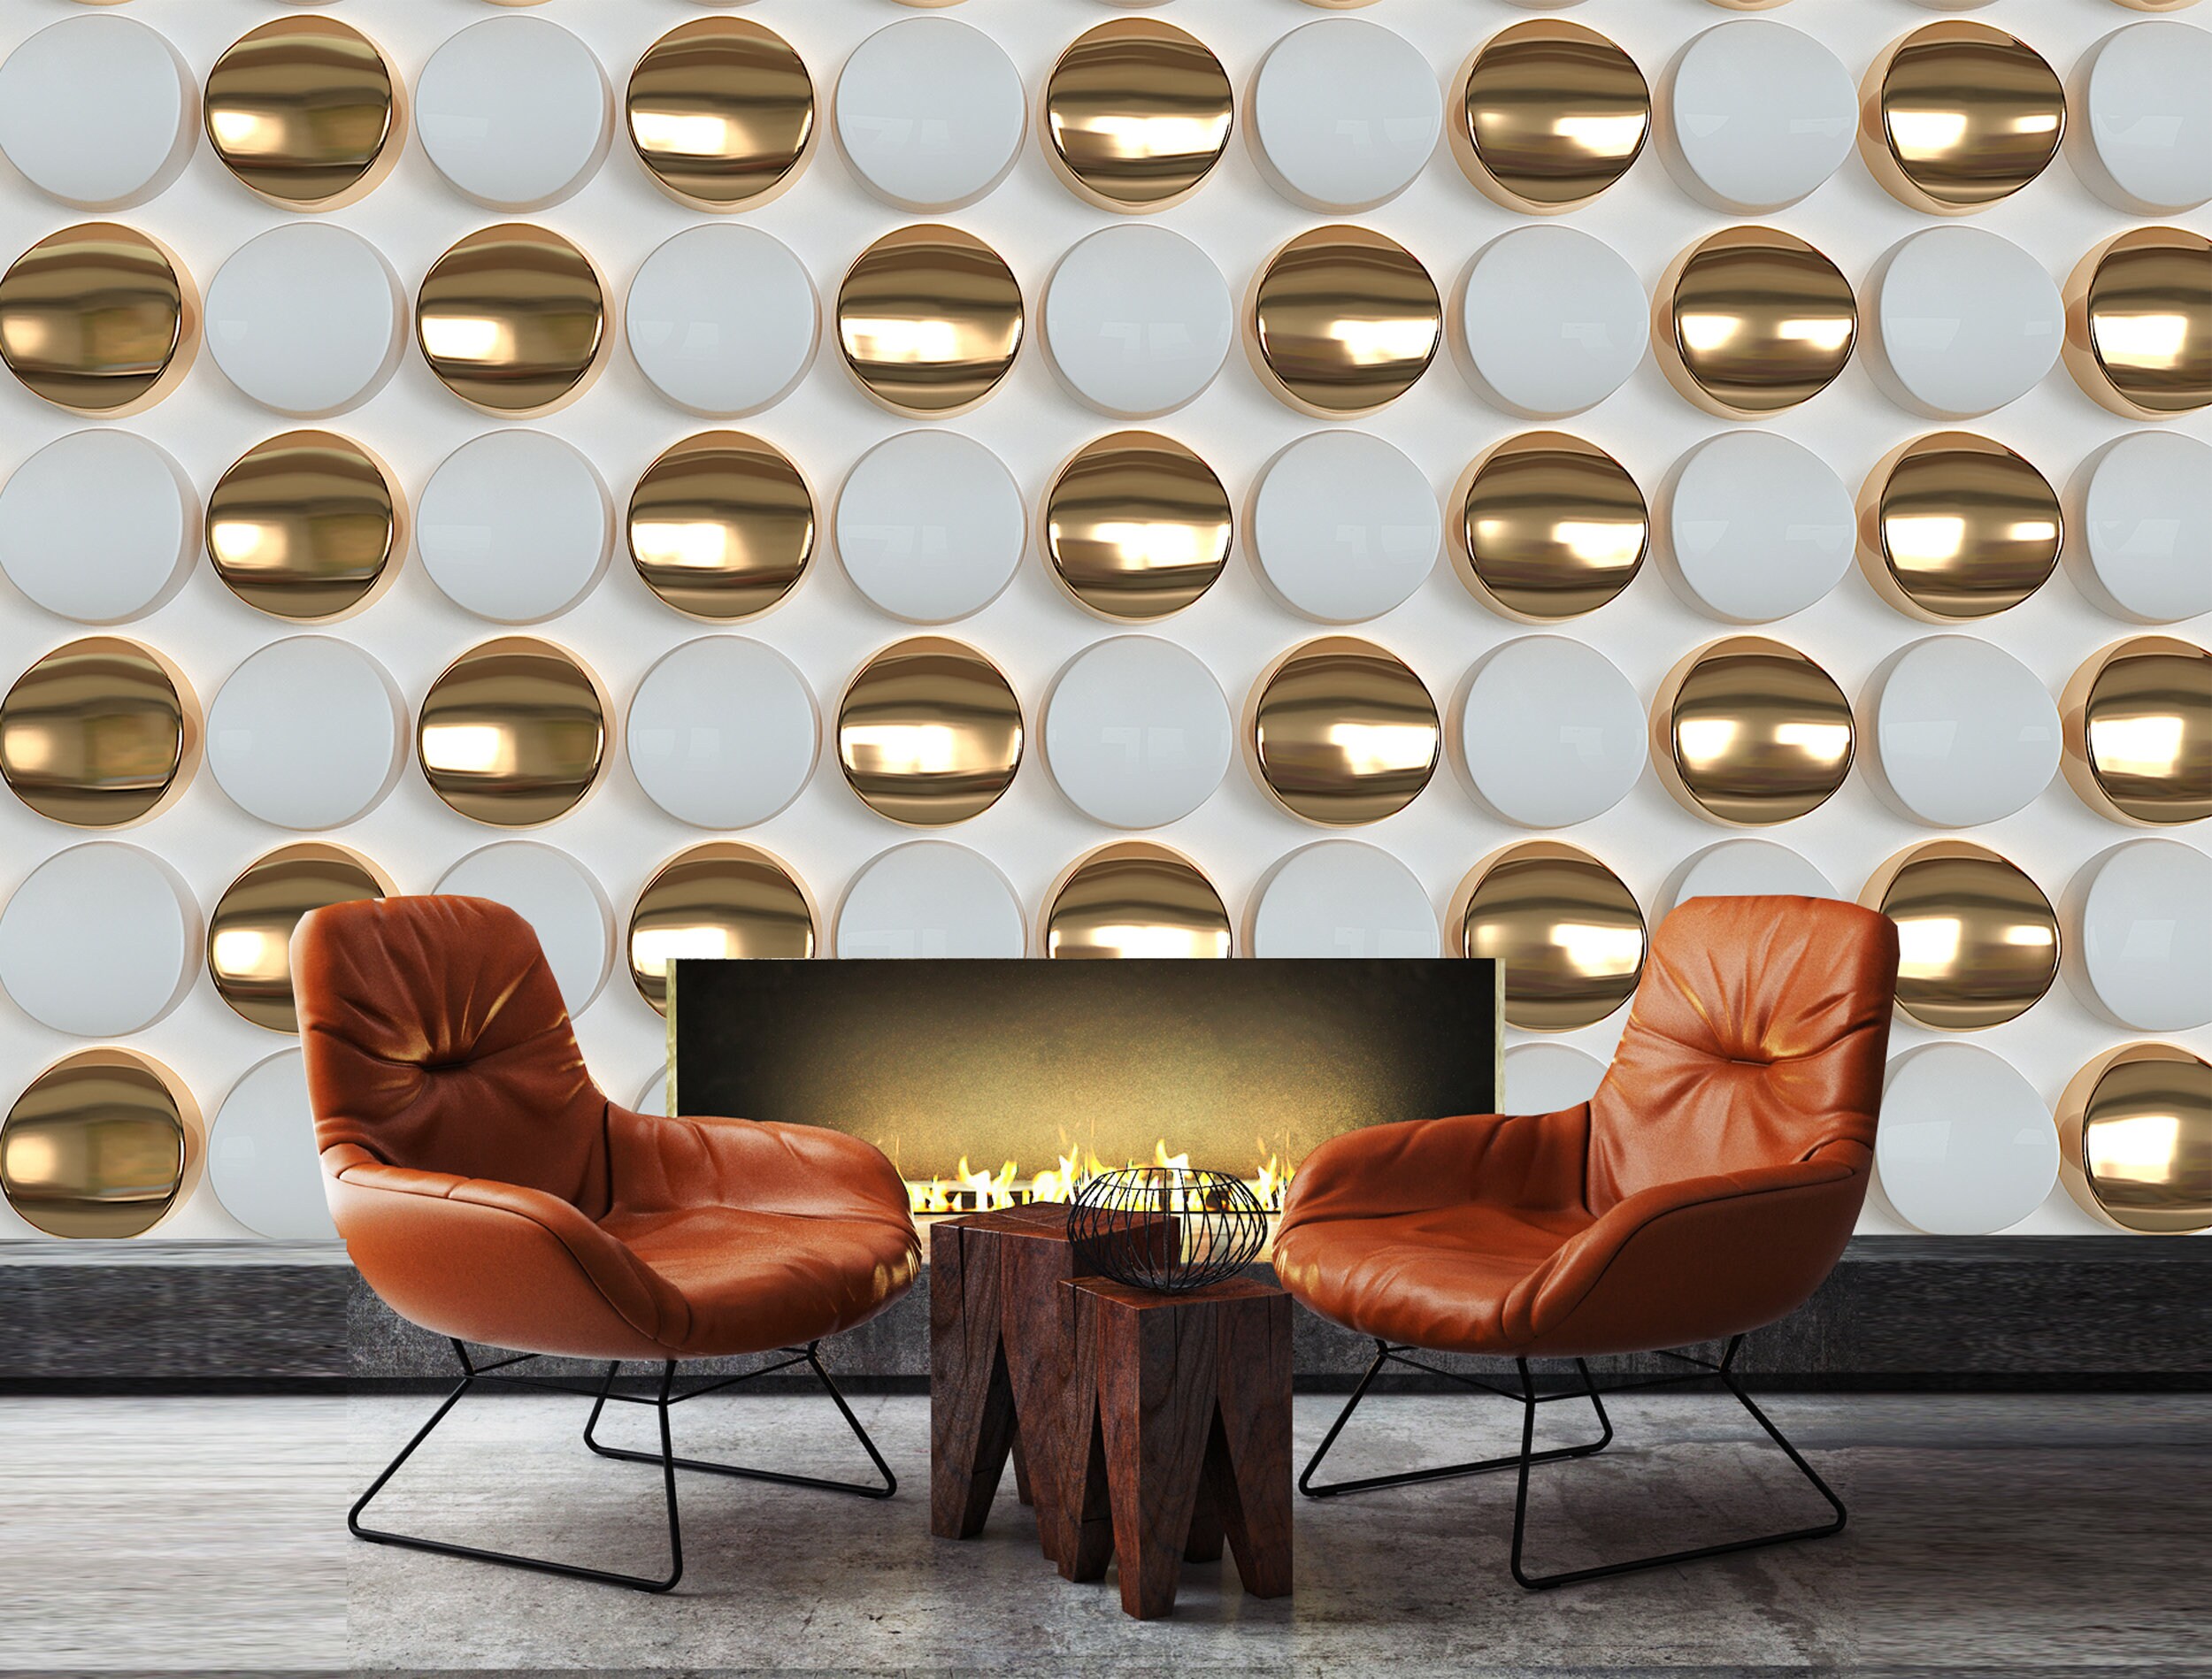 Self Adhesive Wallpaper Roll Paper Disco Ball pattern Shiny circles of  light with a painterly effect Removable Peel and Stick Wallpaper Decorative